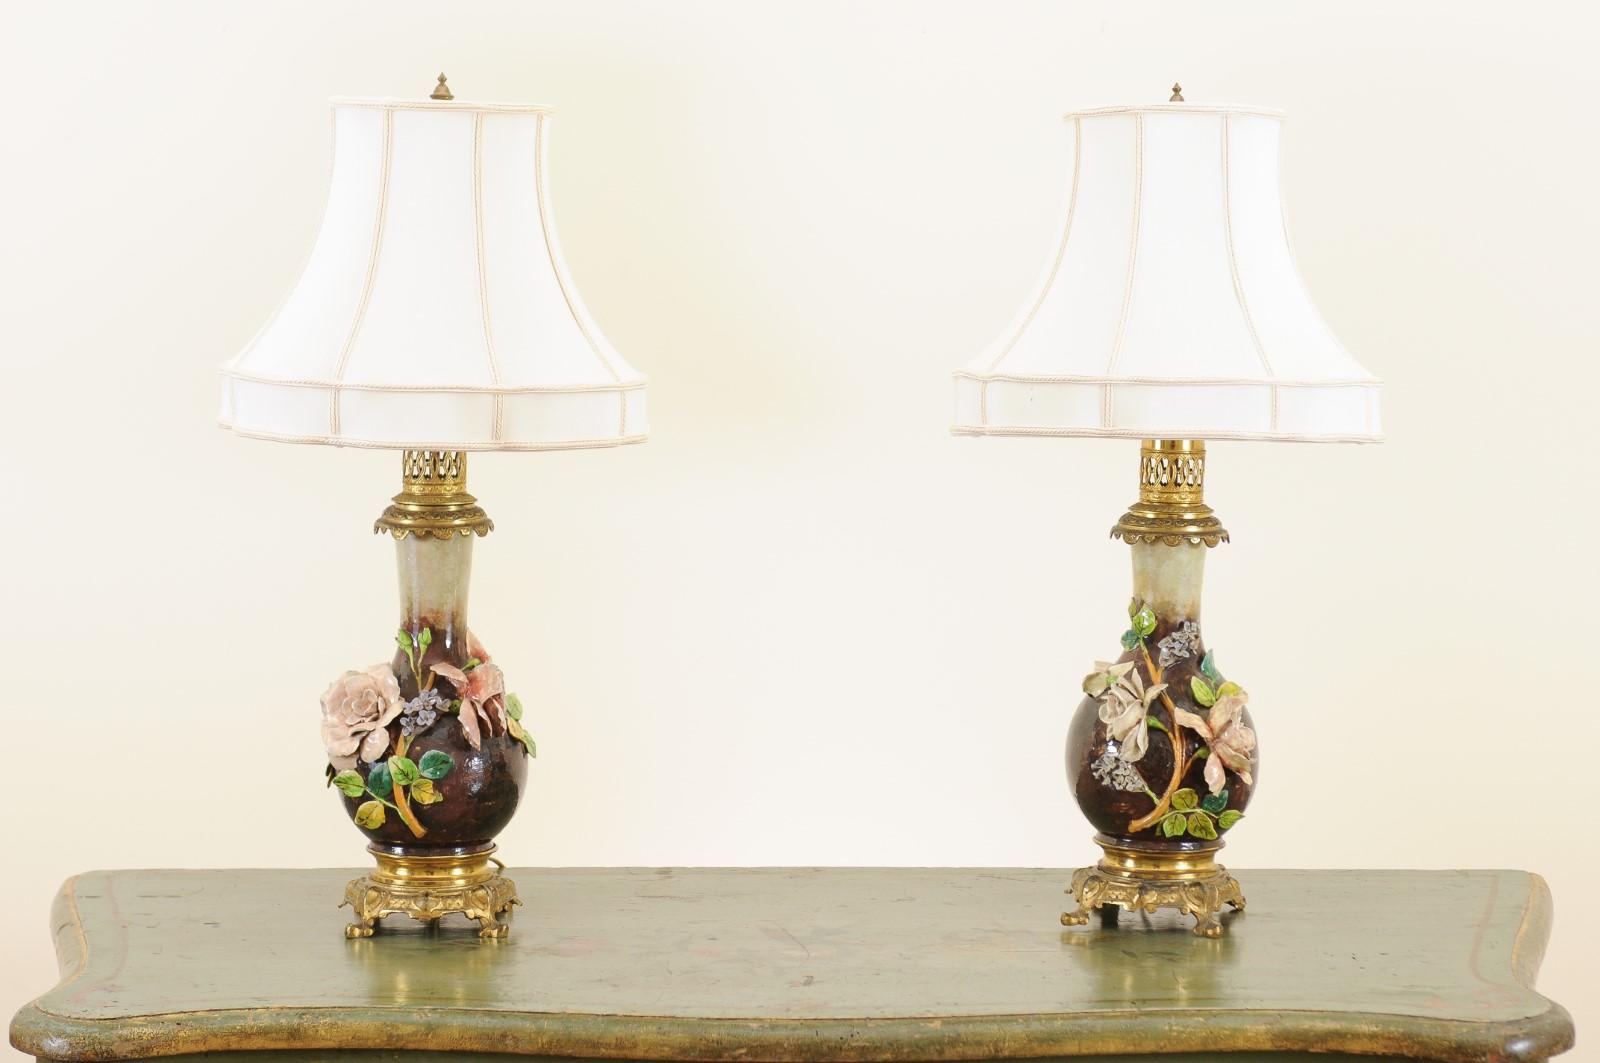 A pair of French majolica vases from the late 19th century made into table lamps. Created in France during the last decade from the 19th century, each of this pair of majolica vases features a lovely raised décor depicting pink roses and their green